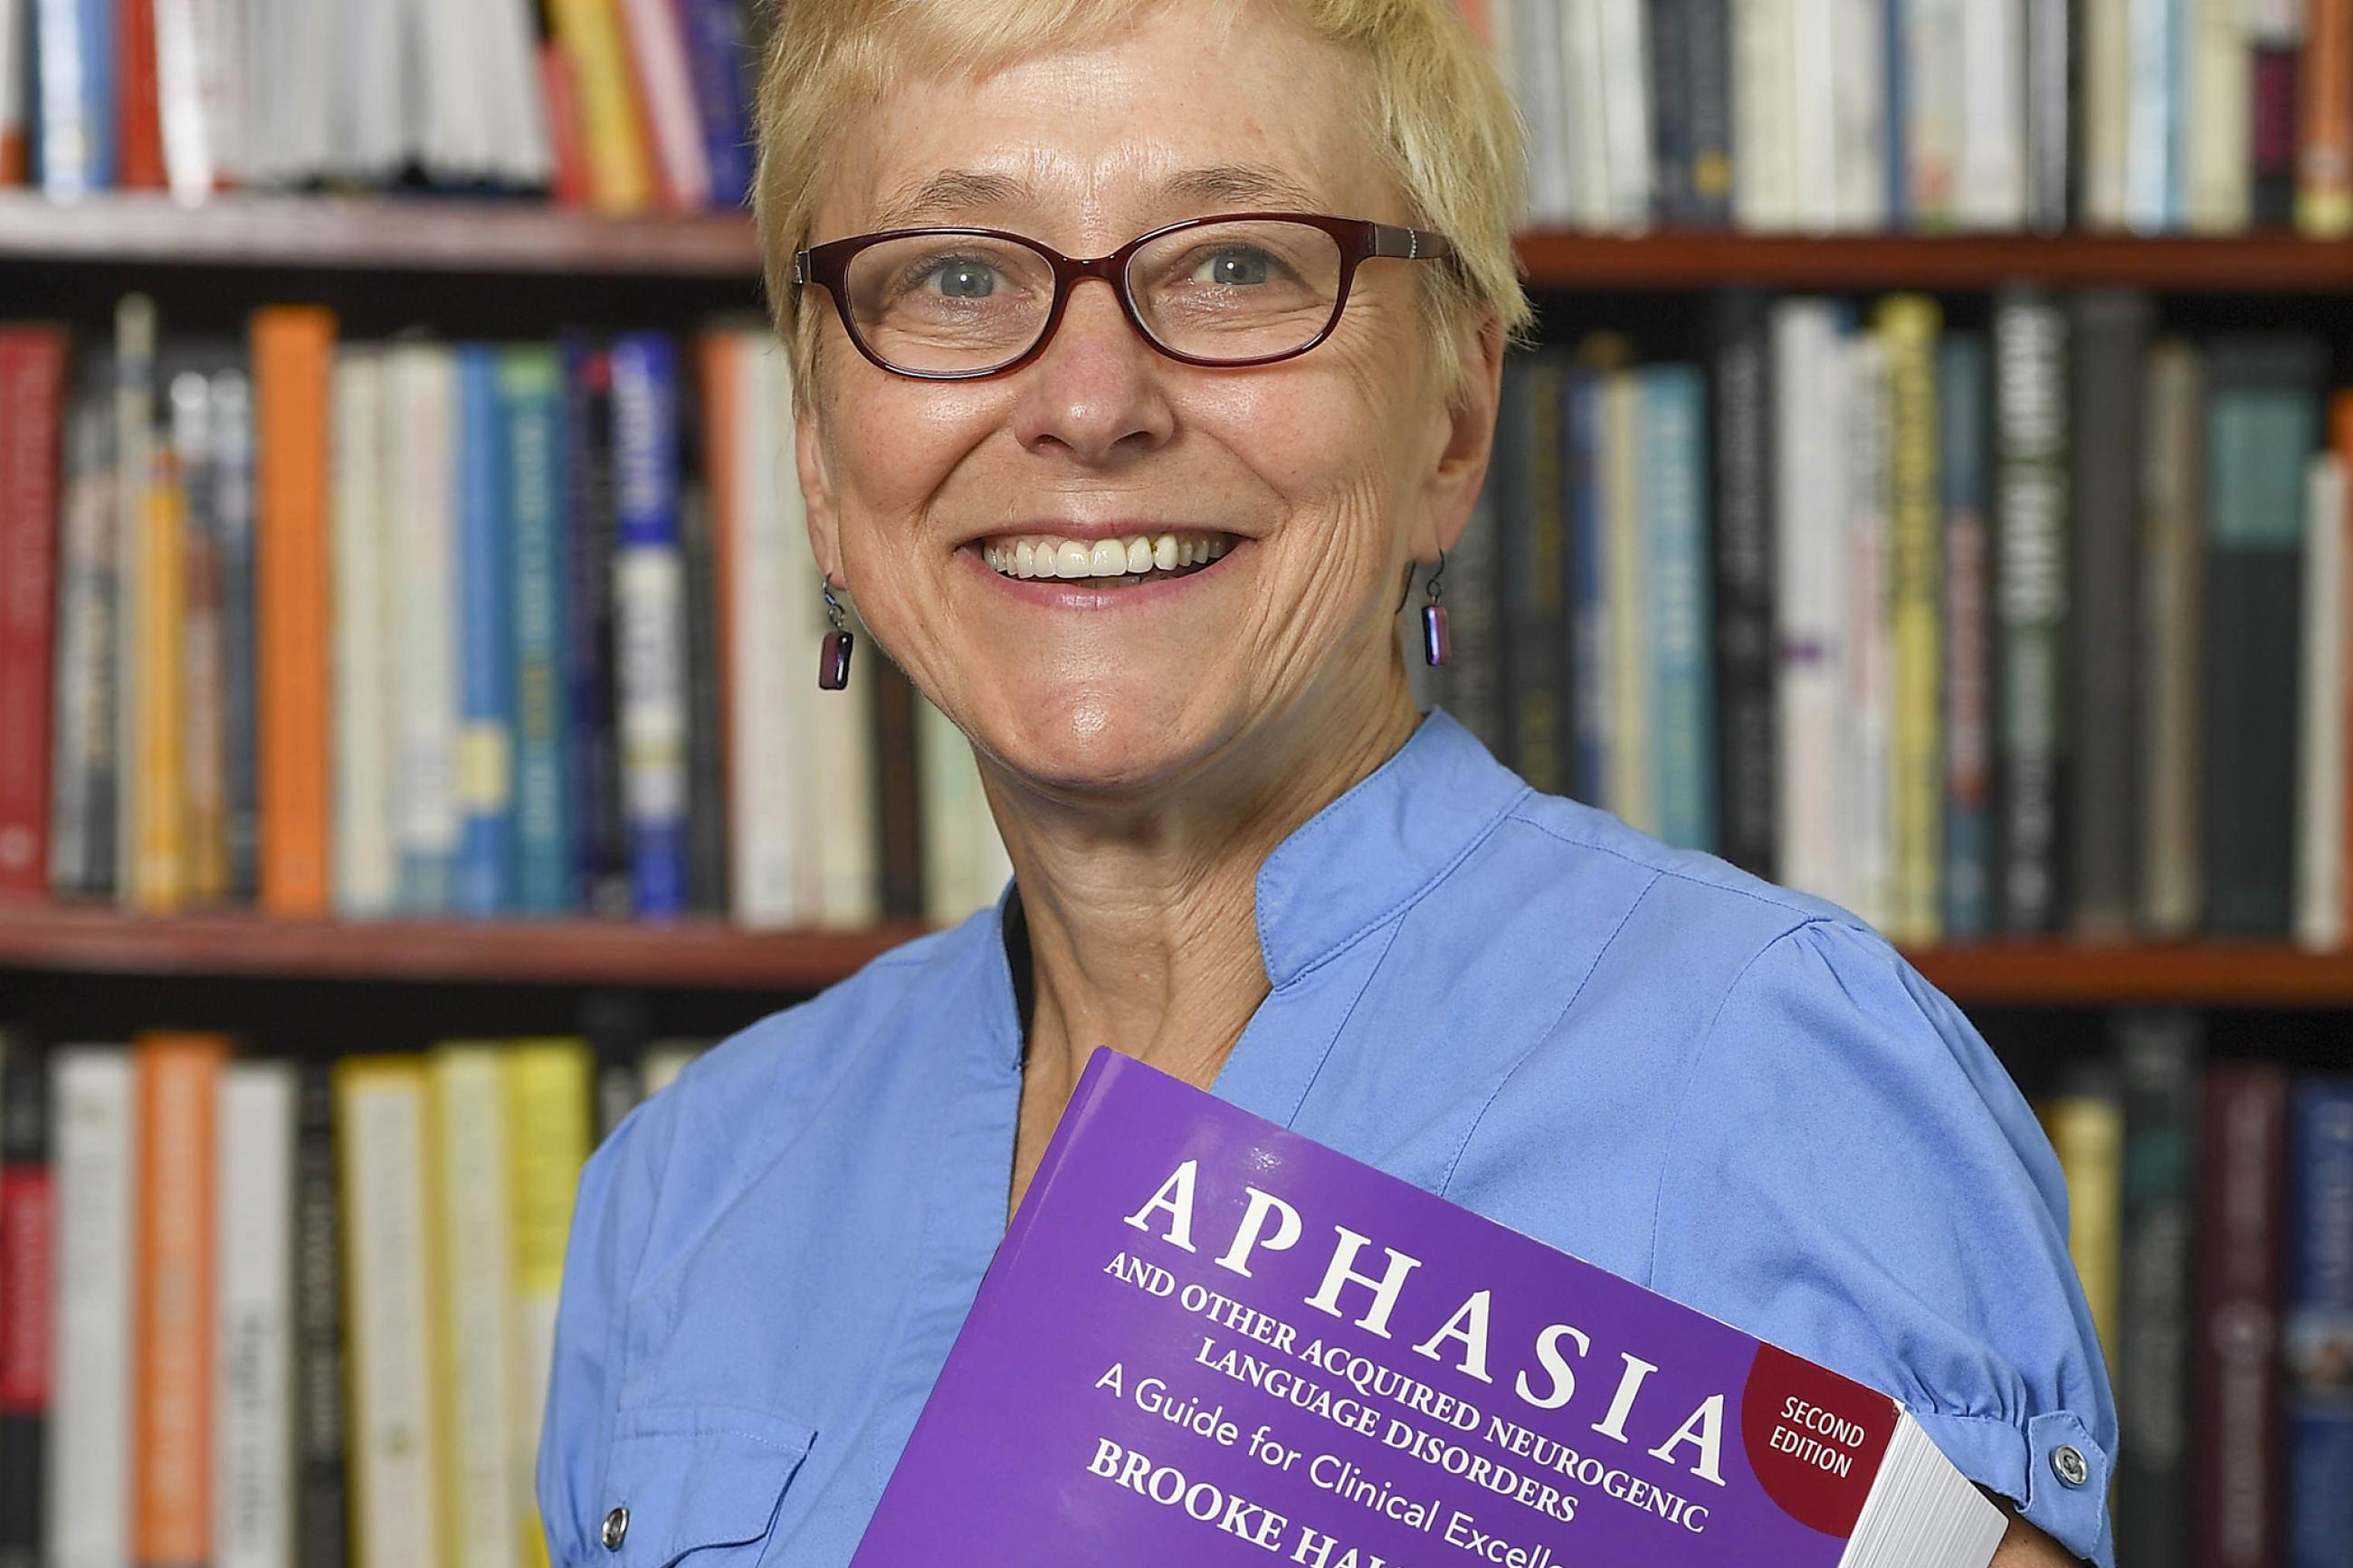 Book by Expert on Aphasia Brings Attention to Common, But Little-Known Disorder